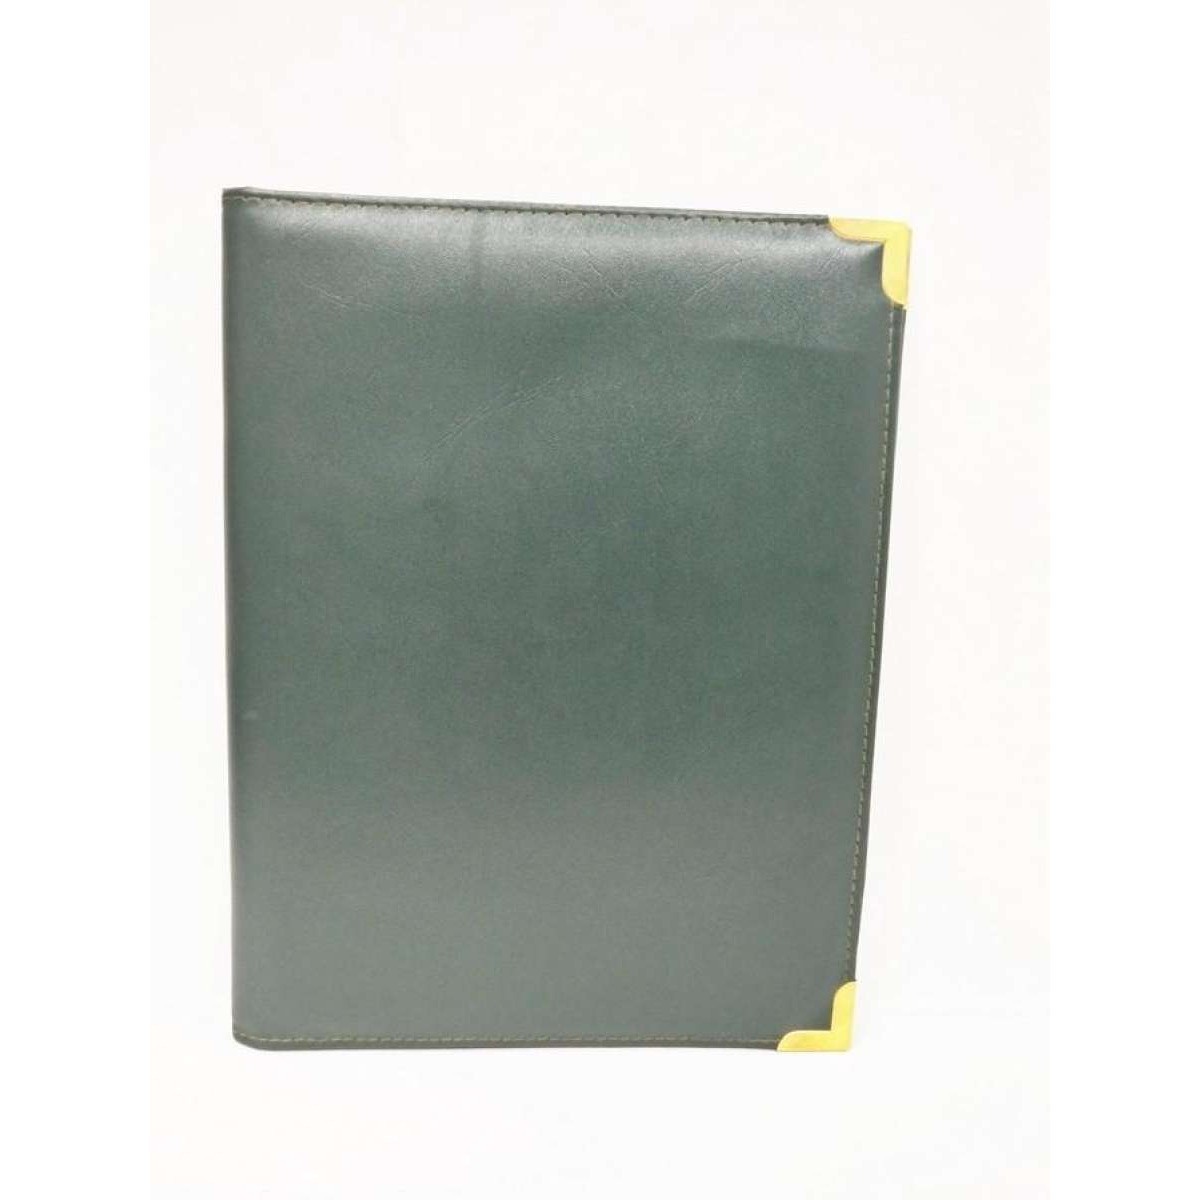 Pad Conference Folder for A4 Size Papers - RF-701